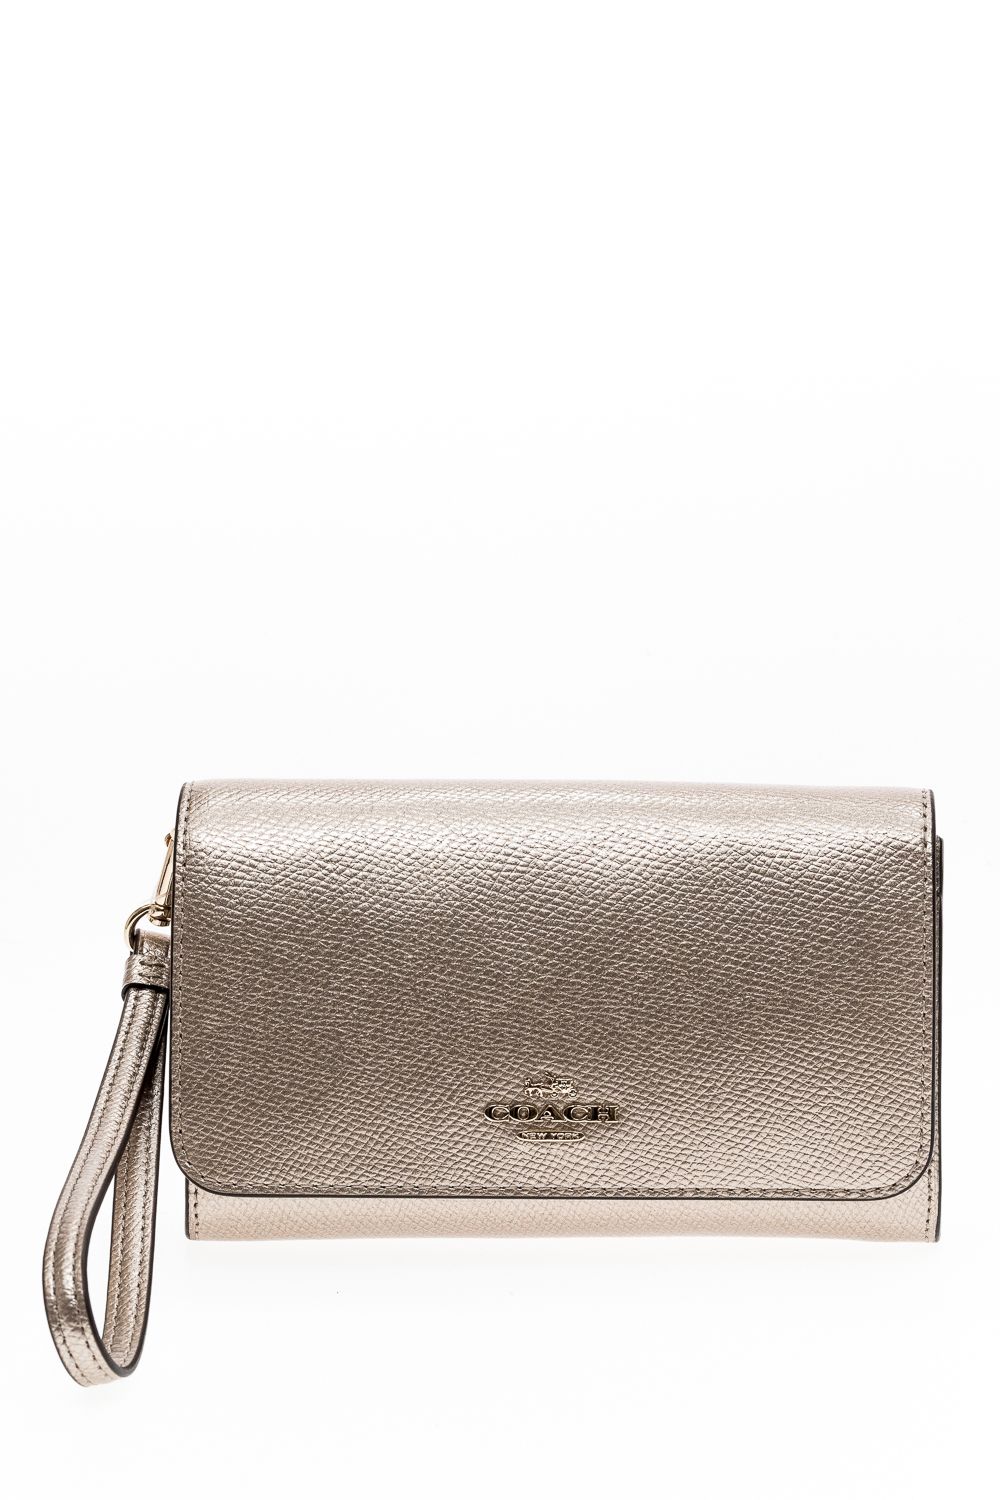 Coach - Leather Wallet Coach - GOLD, Women&#39;s Totes | Italist